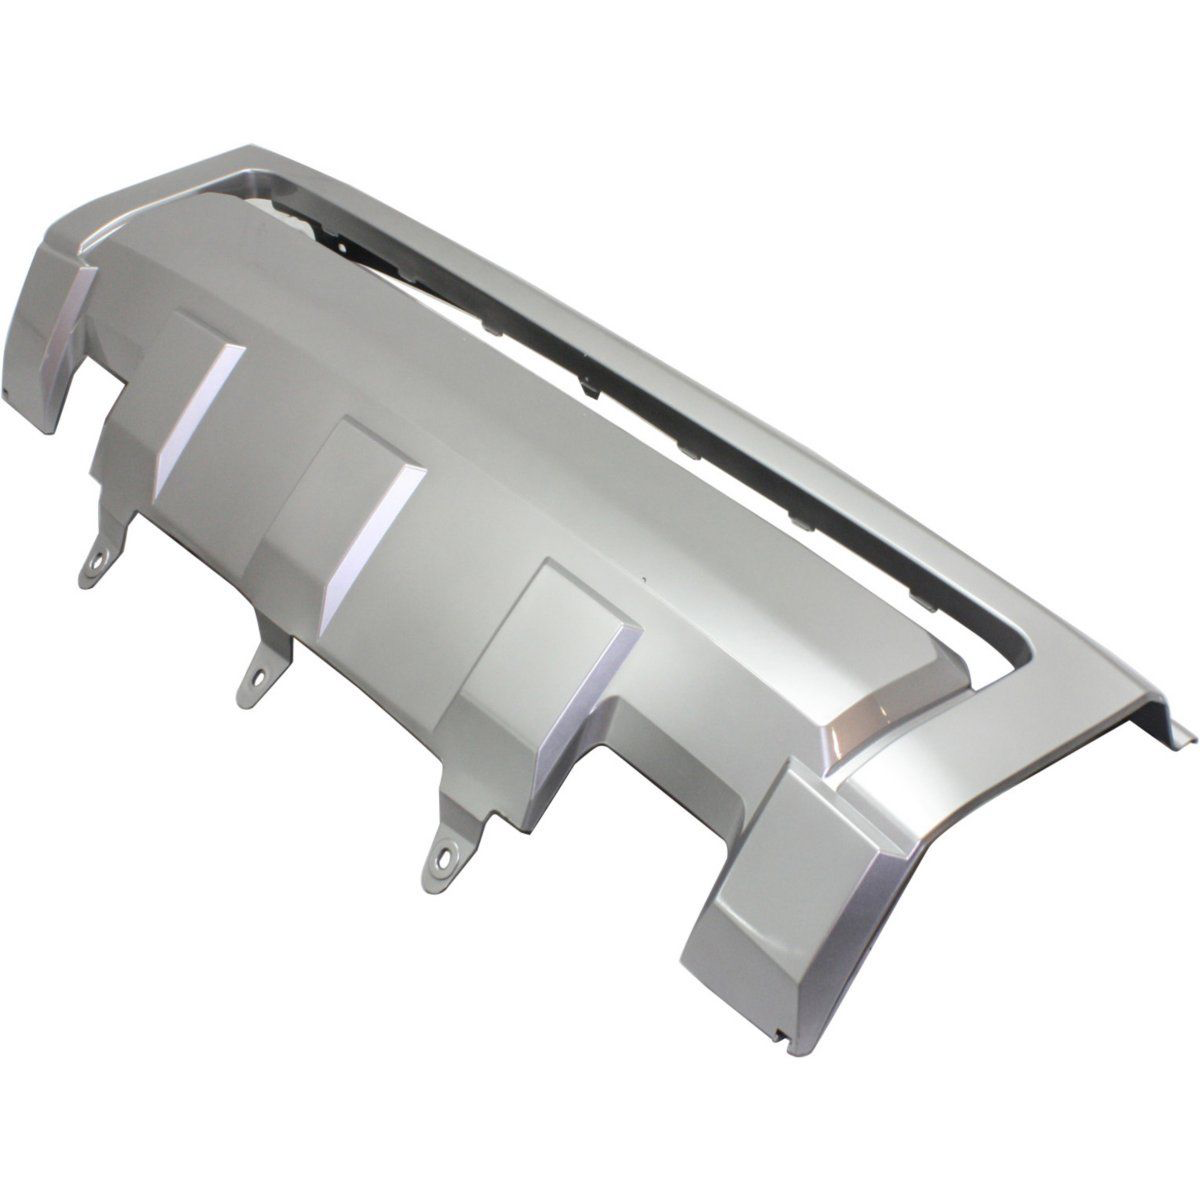 2014-2015 TOYOTA TUNDRA Front Bumper Cover 1794 EDITION Painted to Match